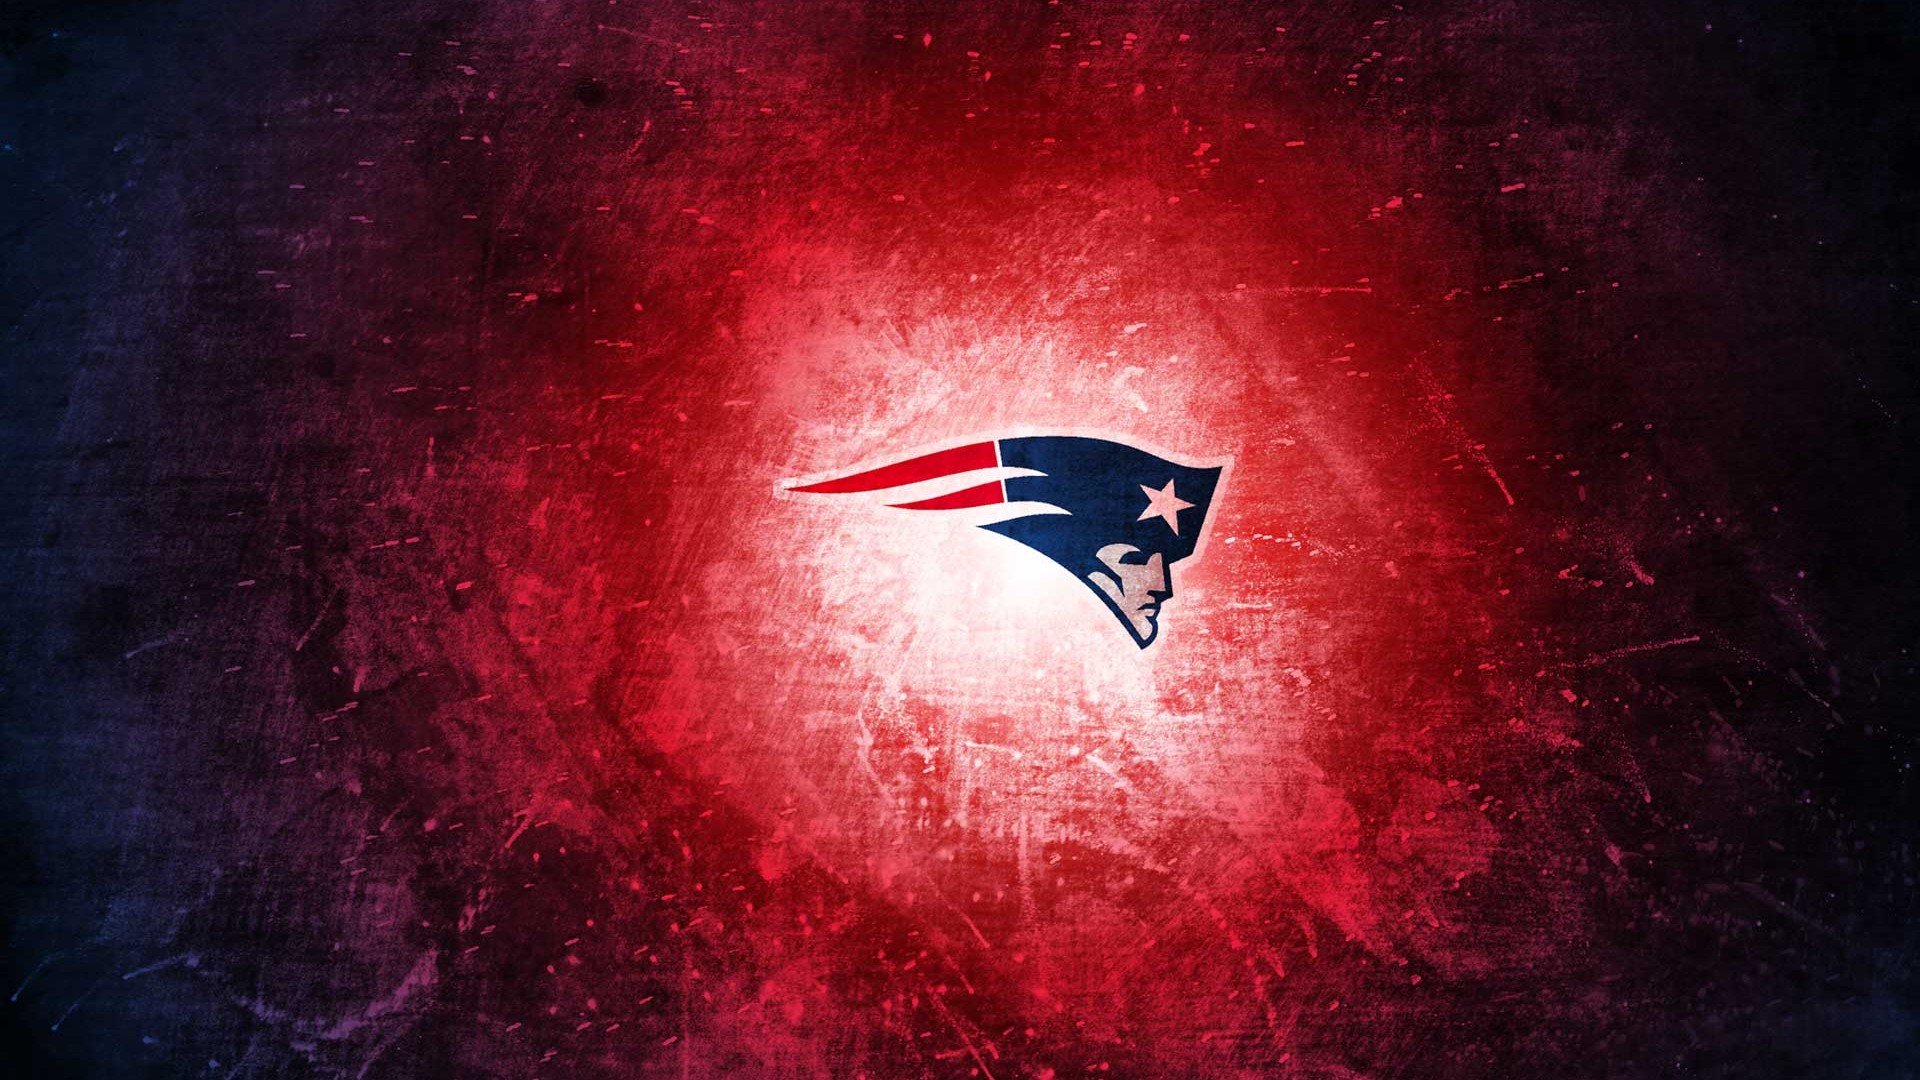 New England Patriots NFL Wallpaper in HD with high-resolution 1920x1080 pixel. Download and set as wallpaper for Desktop Computer, Apple iPhone X, XS Max, XR, 8, 7, 6, SE, iPad, Android